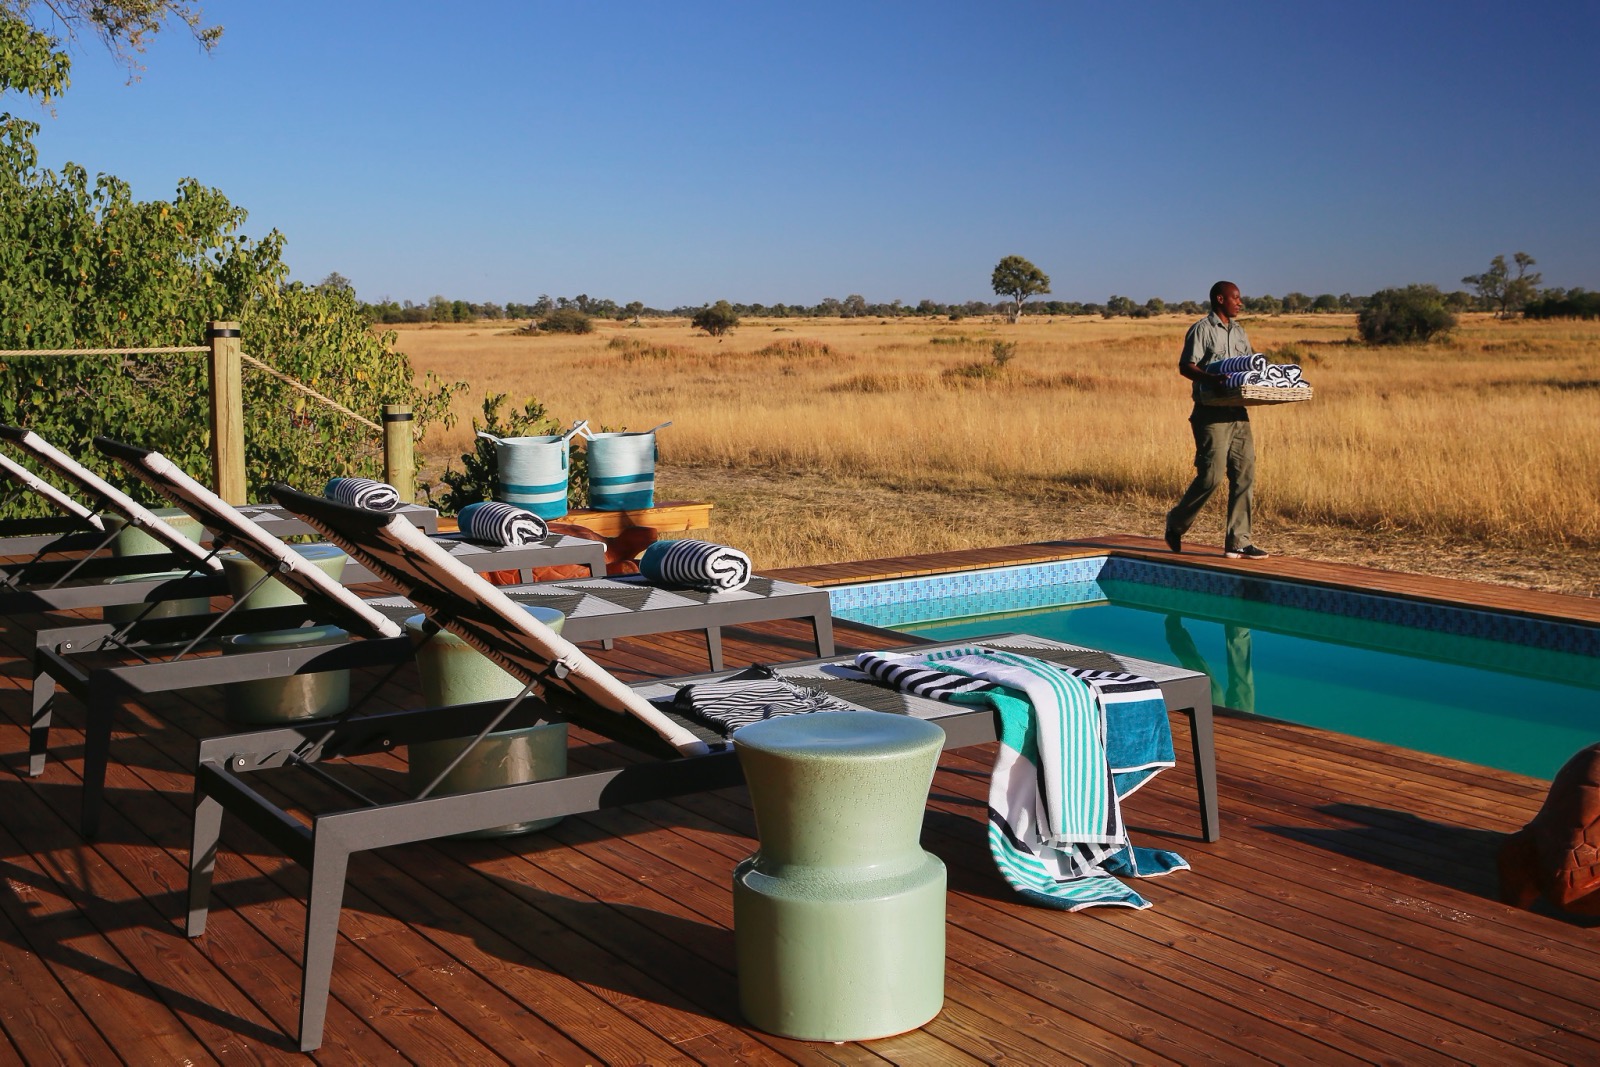 A refreshing swimming pool and relaxing sun loungers in the wide, open savanna at Tuludi Camp in Botswana